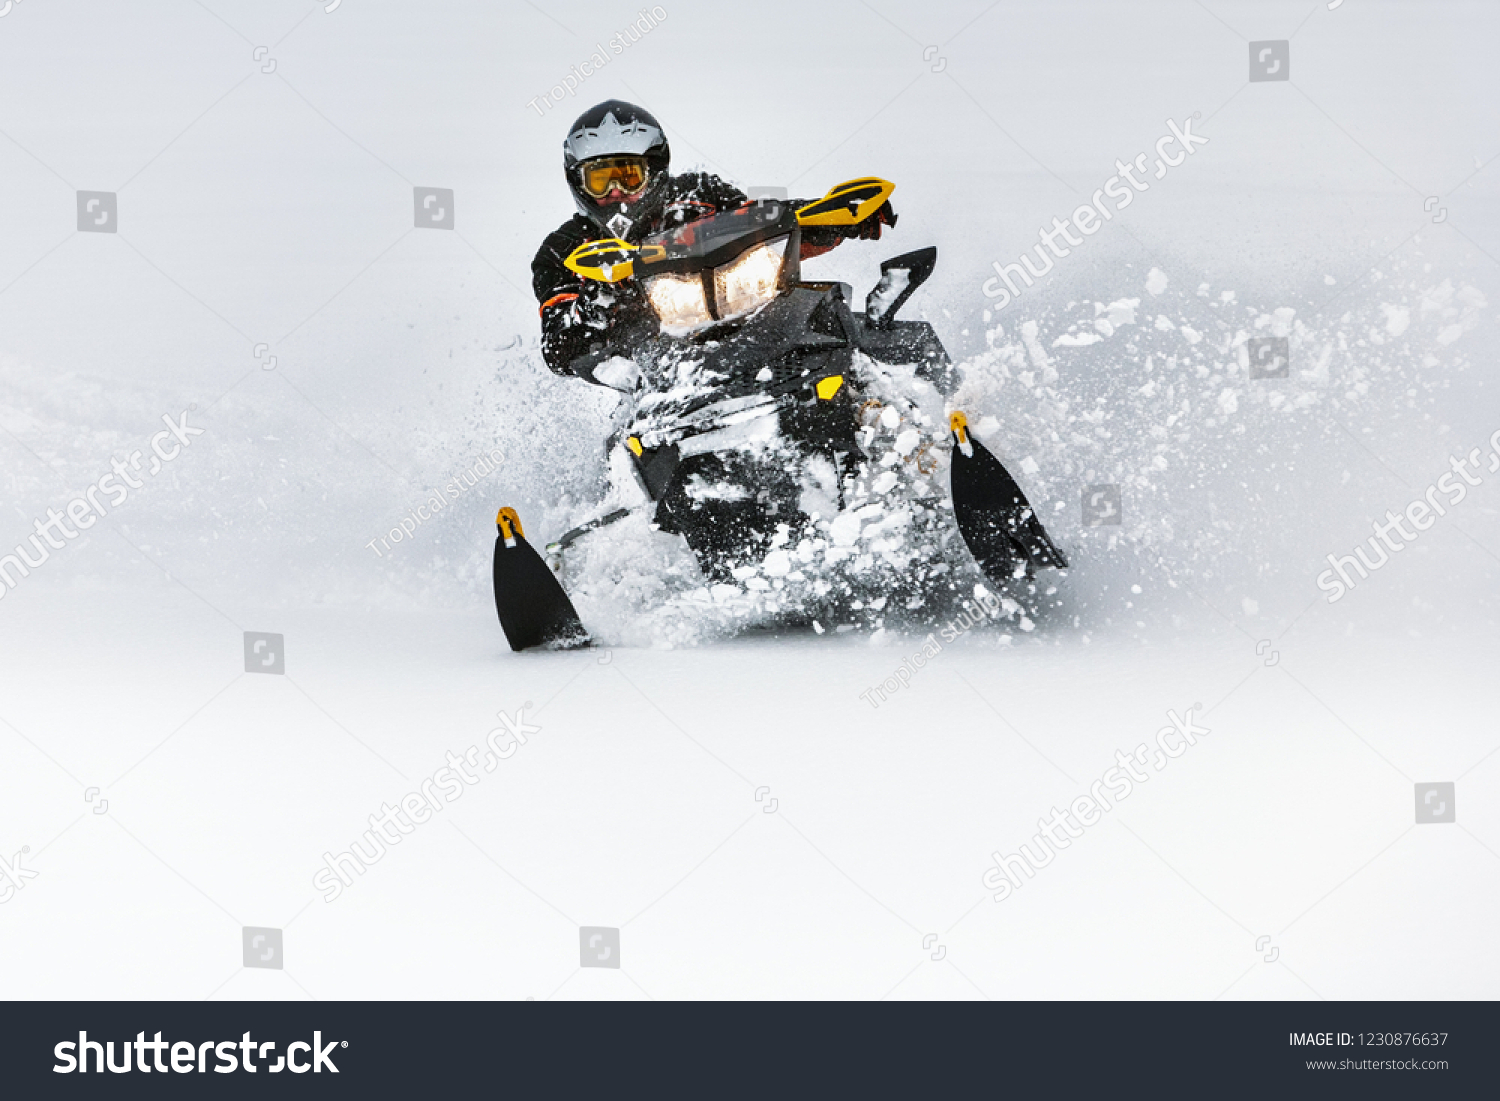 In deep snowdrift snowmobile rider make fast turn. Riding with fun in deep snow powder during backcountry tour. Extreme sport adventure, outdoor activity during winter holiday on ski mountain resort. #1230876637